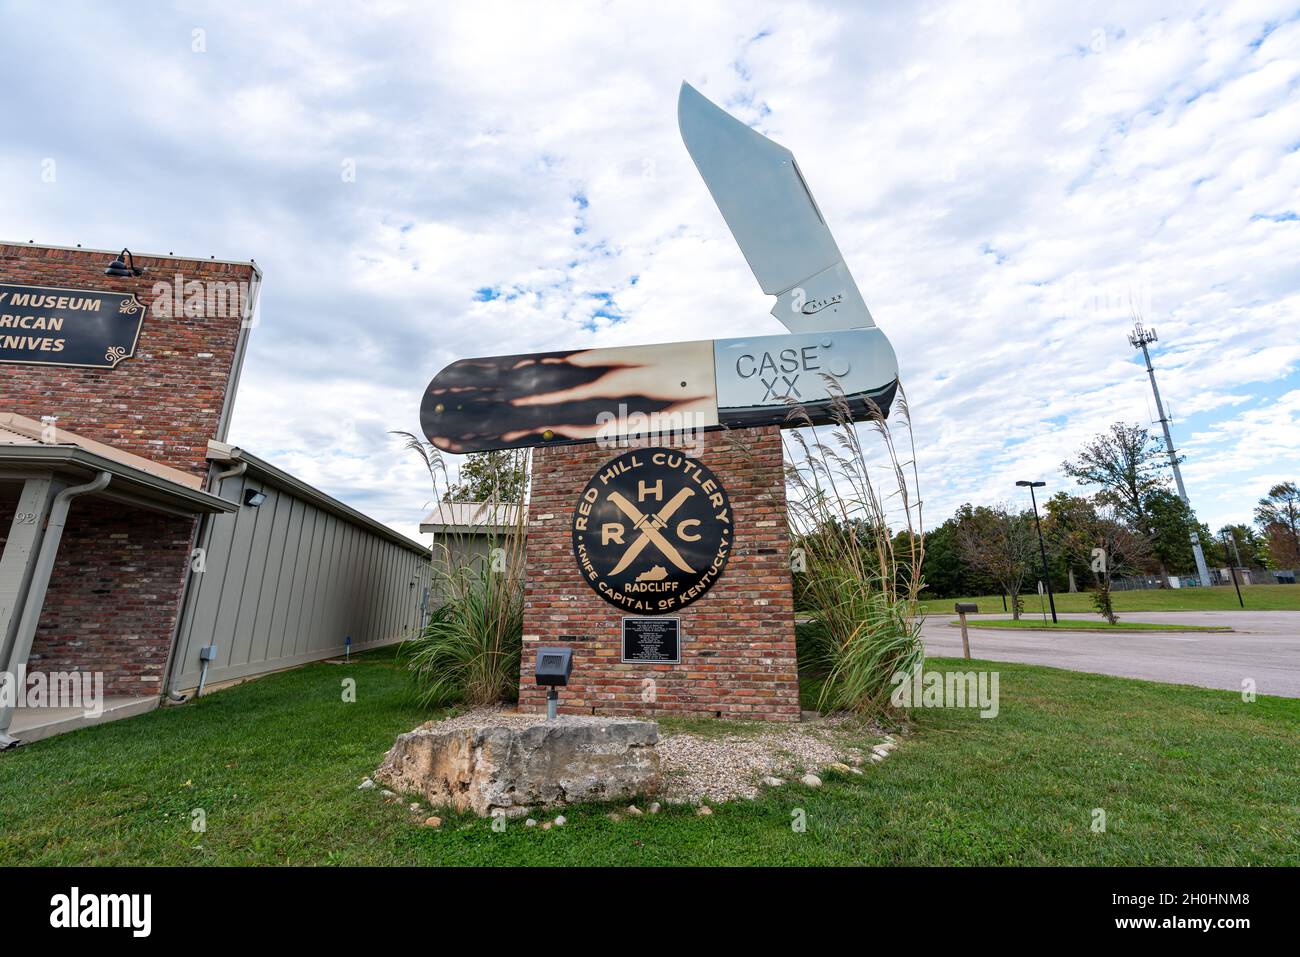 Radcliff, KY, USA - October 11, 2021: The Guinness Book of World Records certified this month that Red Hill Cutlery had the largest  pocket knife. Stock Photo